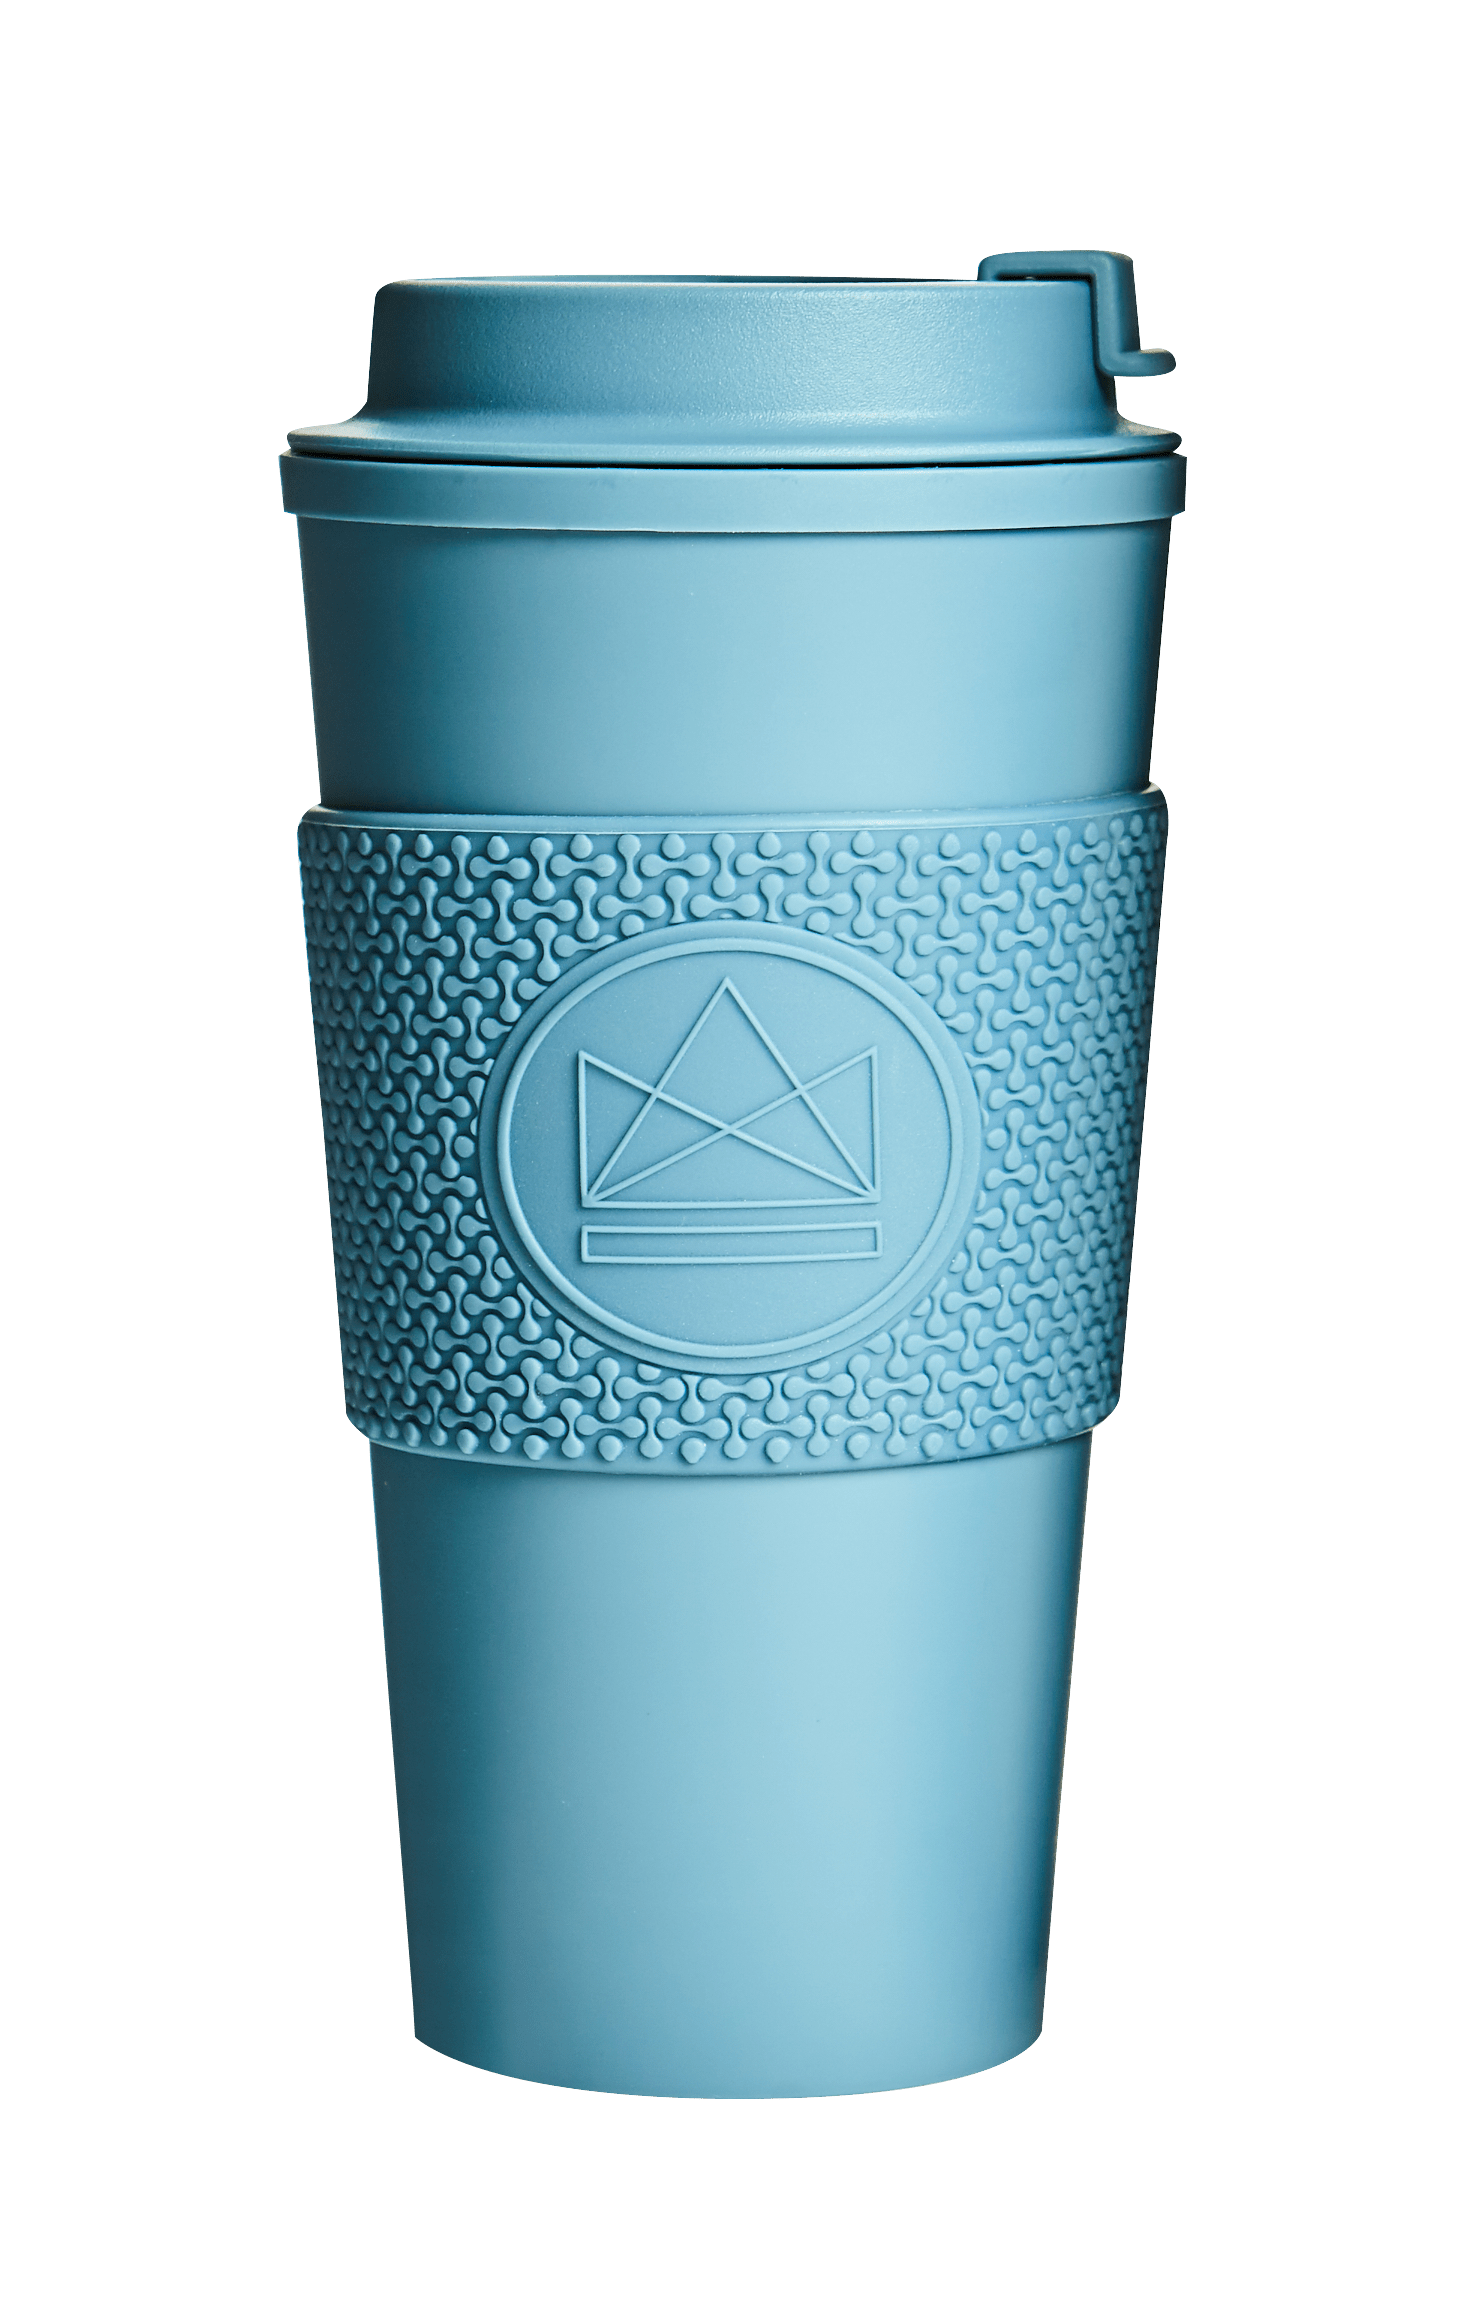 Neon Kactus - Double-Walled Coffee Cup, Reusable Coffee Cup with Resealable Lid, Food-grade Silicone Seal and Sleeve, Insulated